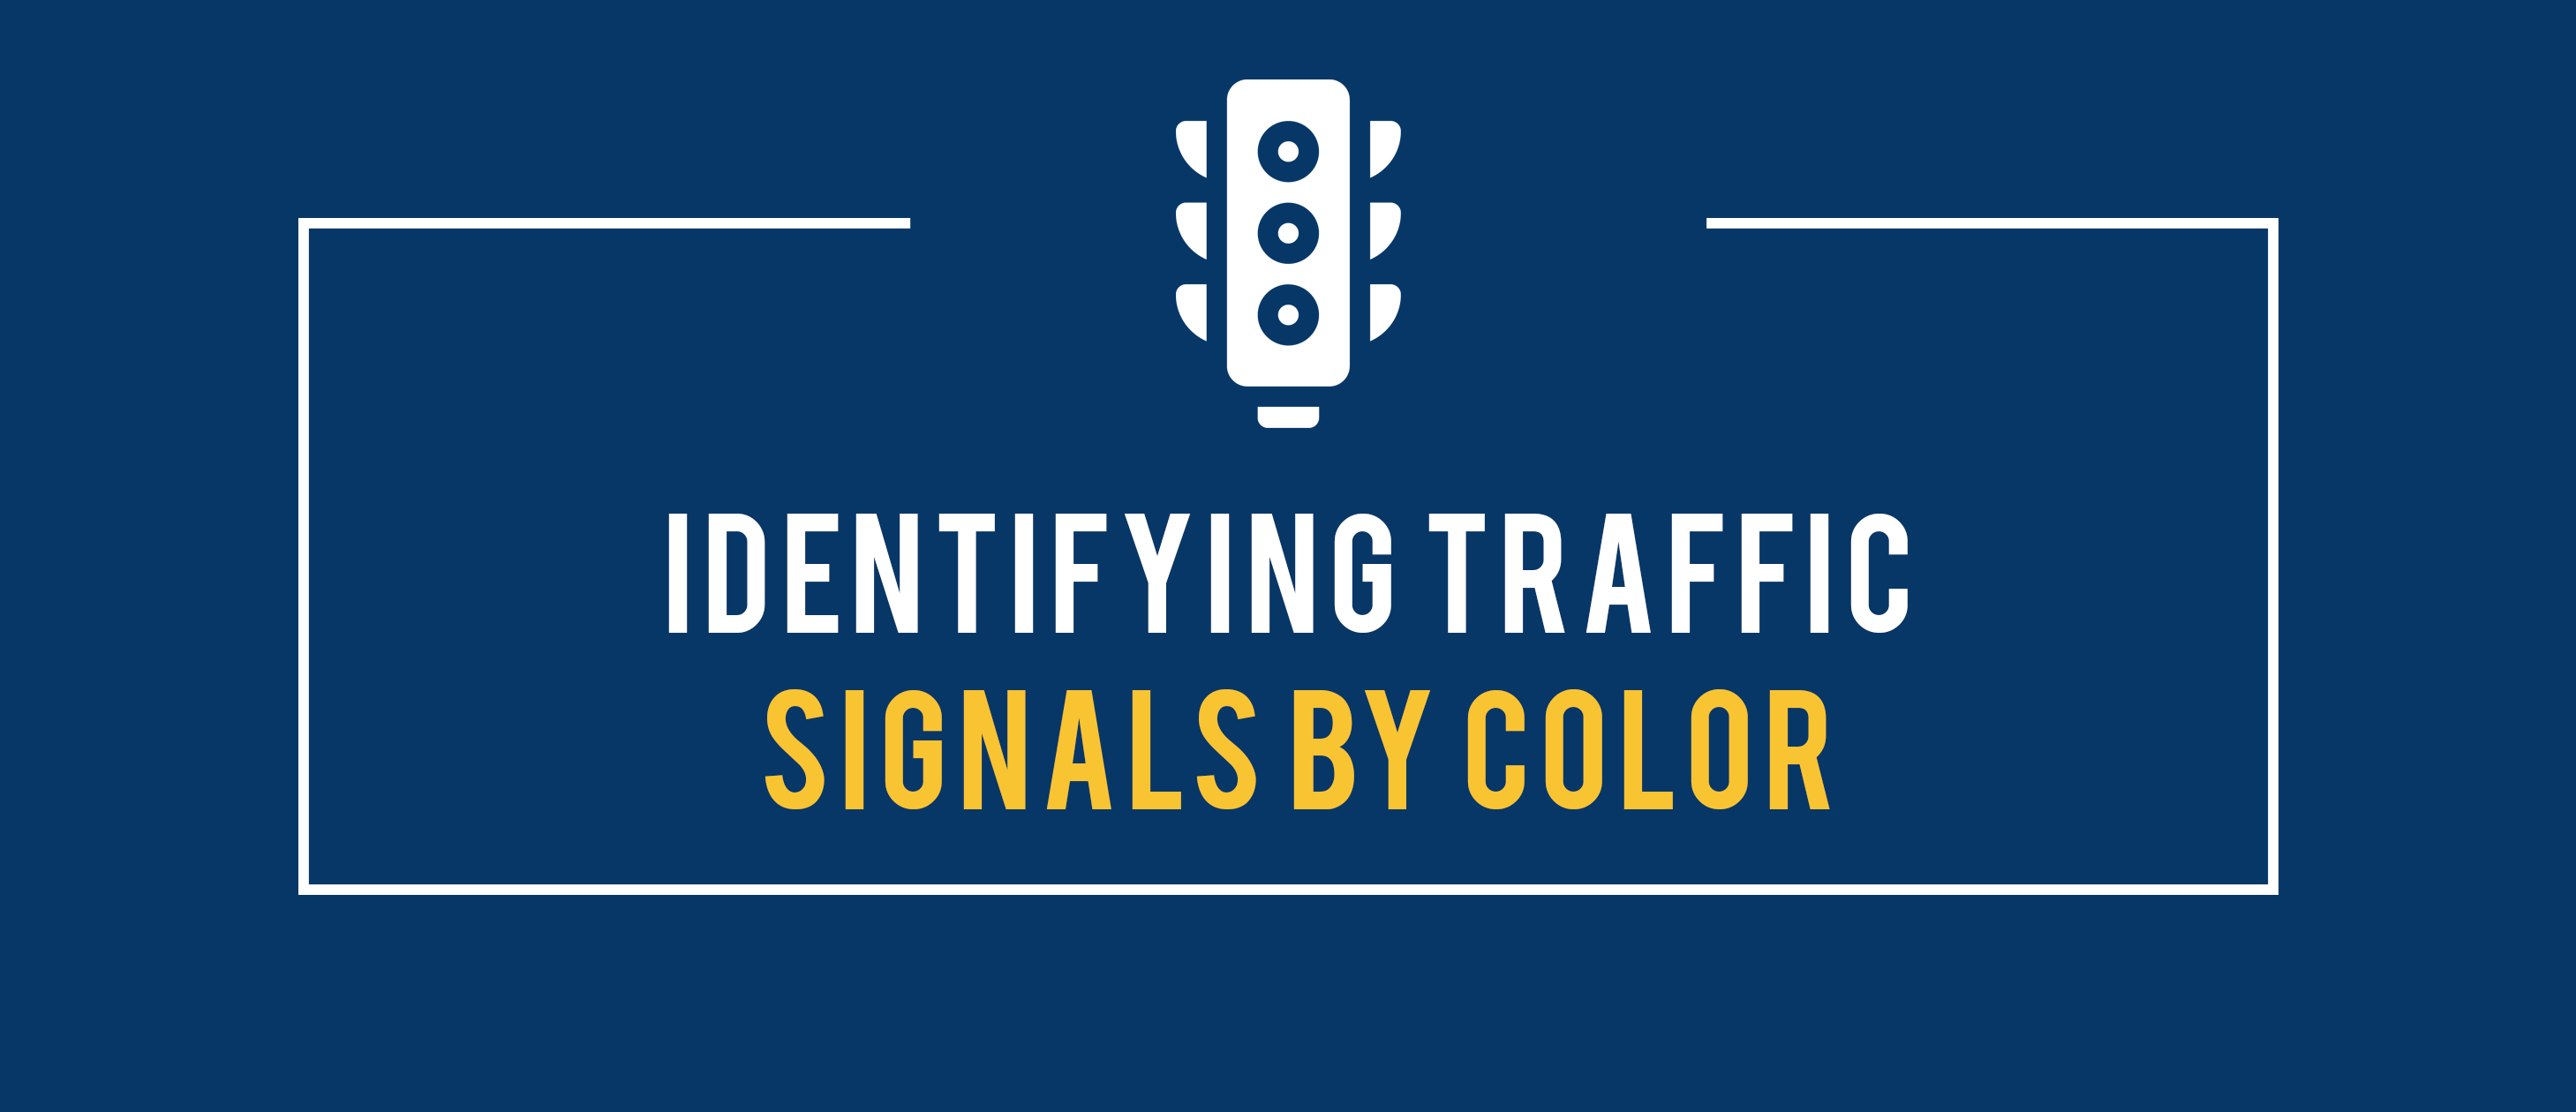 Identifying traffic signals by color.